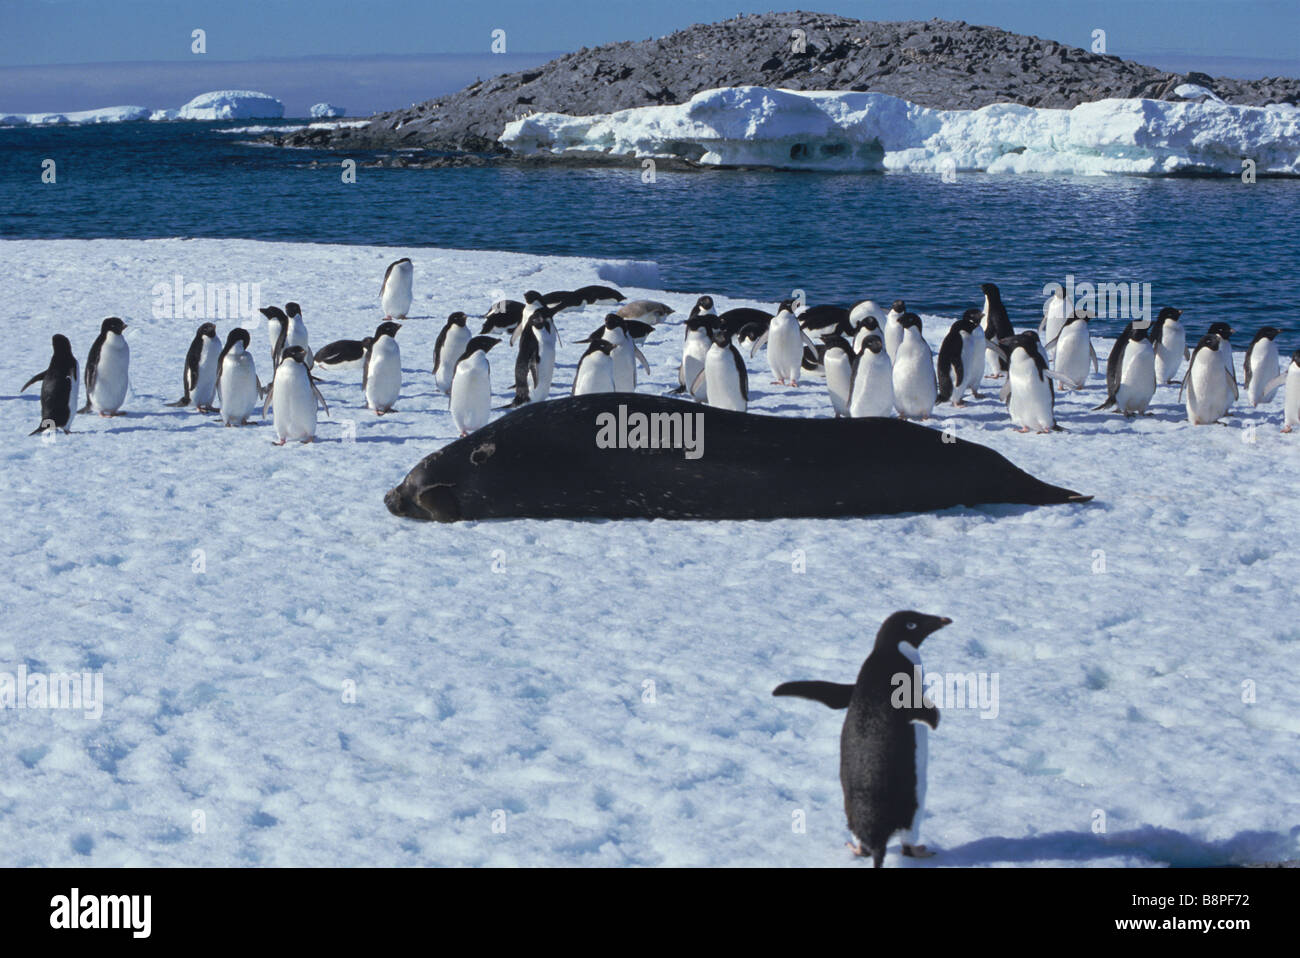 WEDDELL SEAL AND ADELLIE PENGUINS, ANTARCTIC Stock Photo